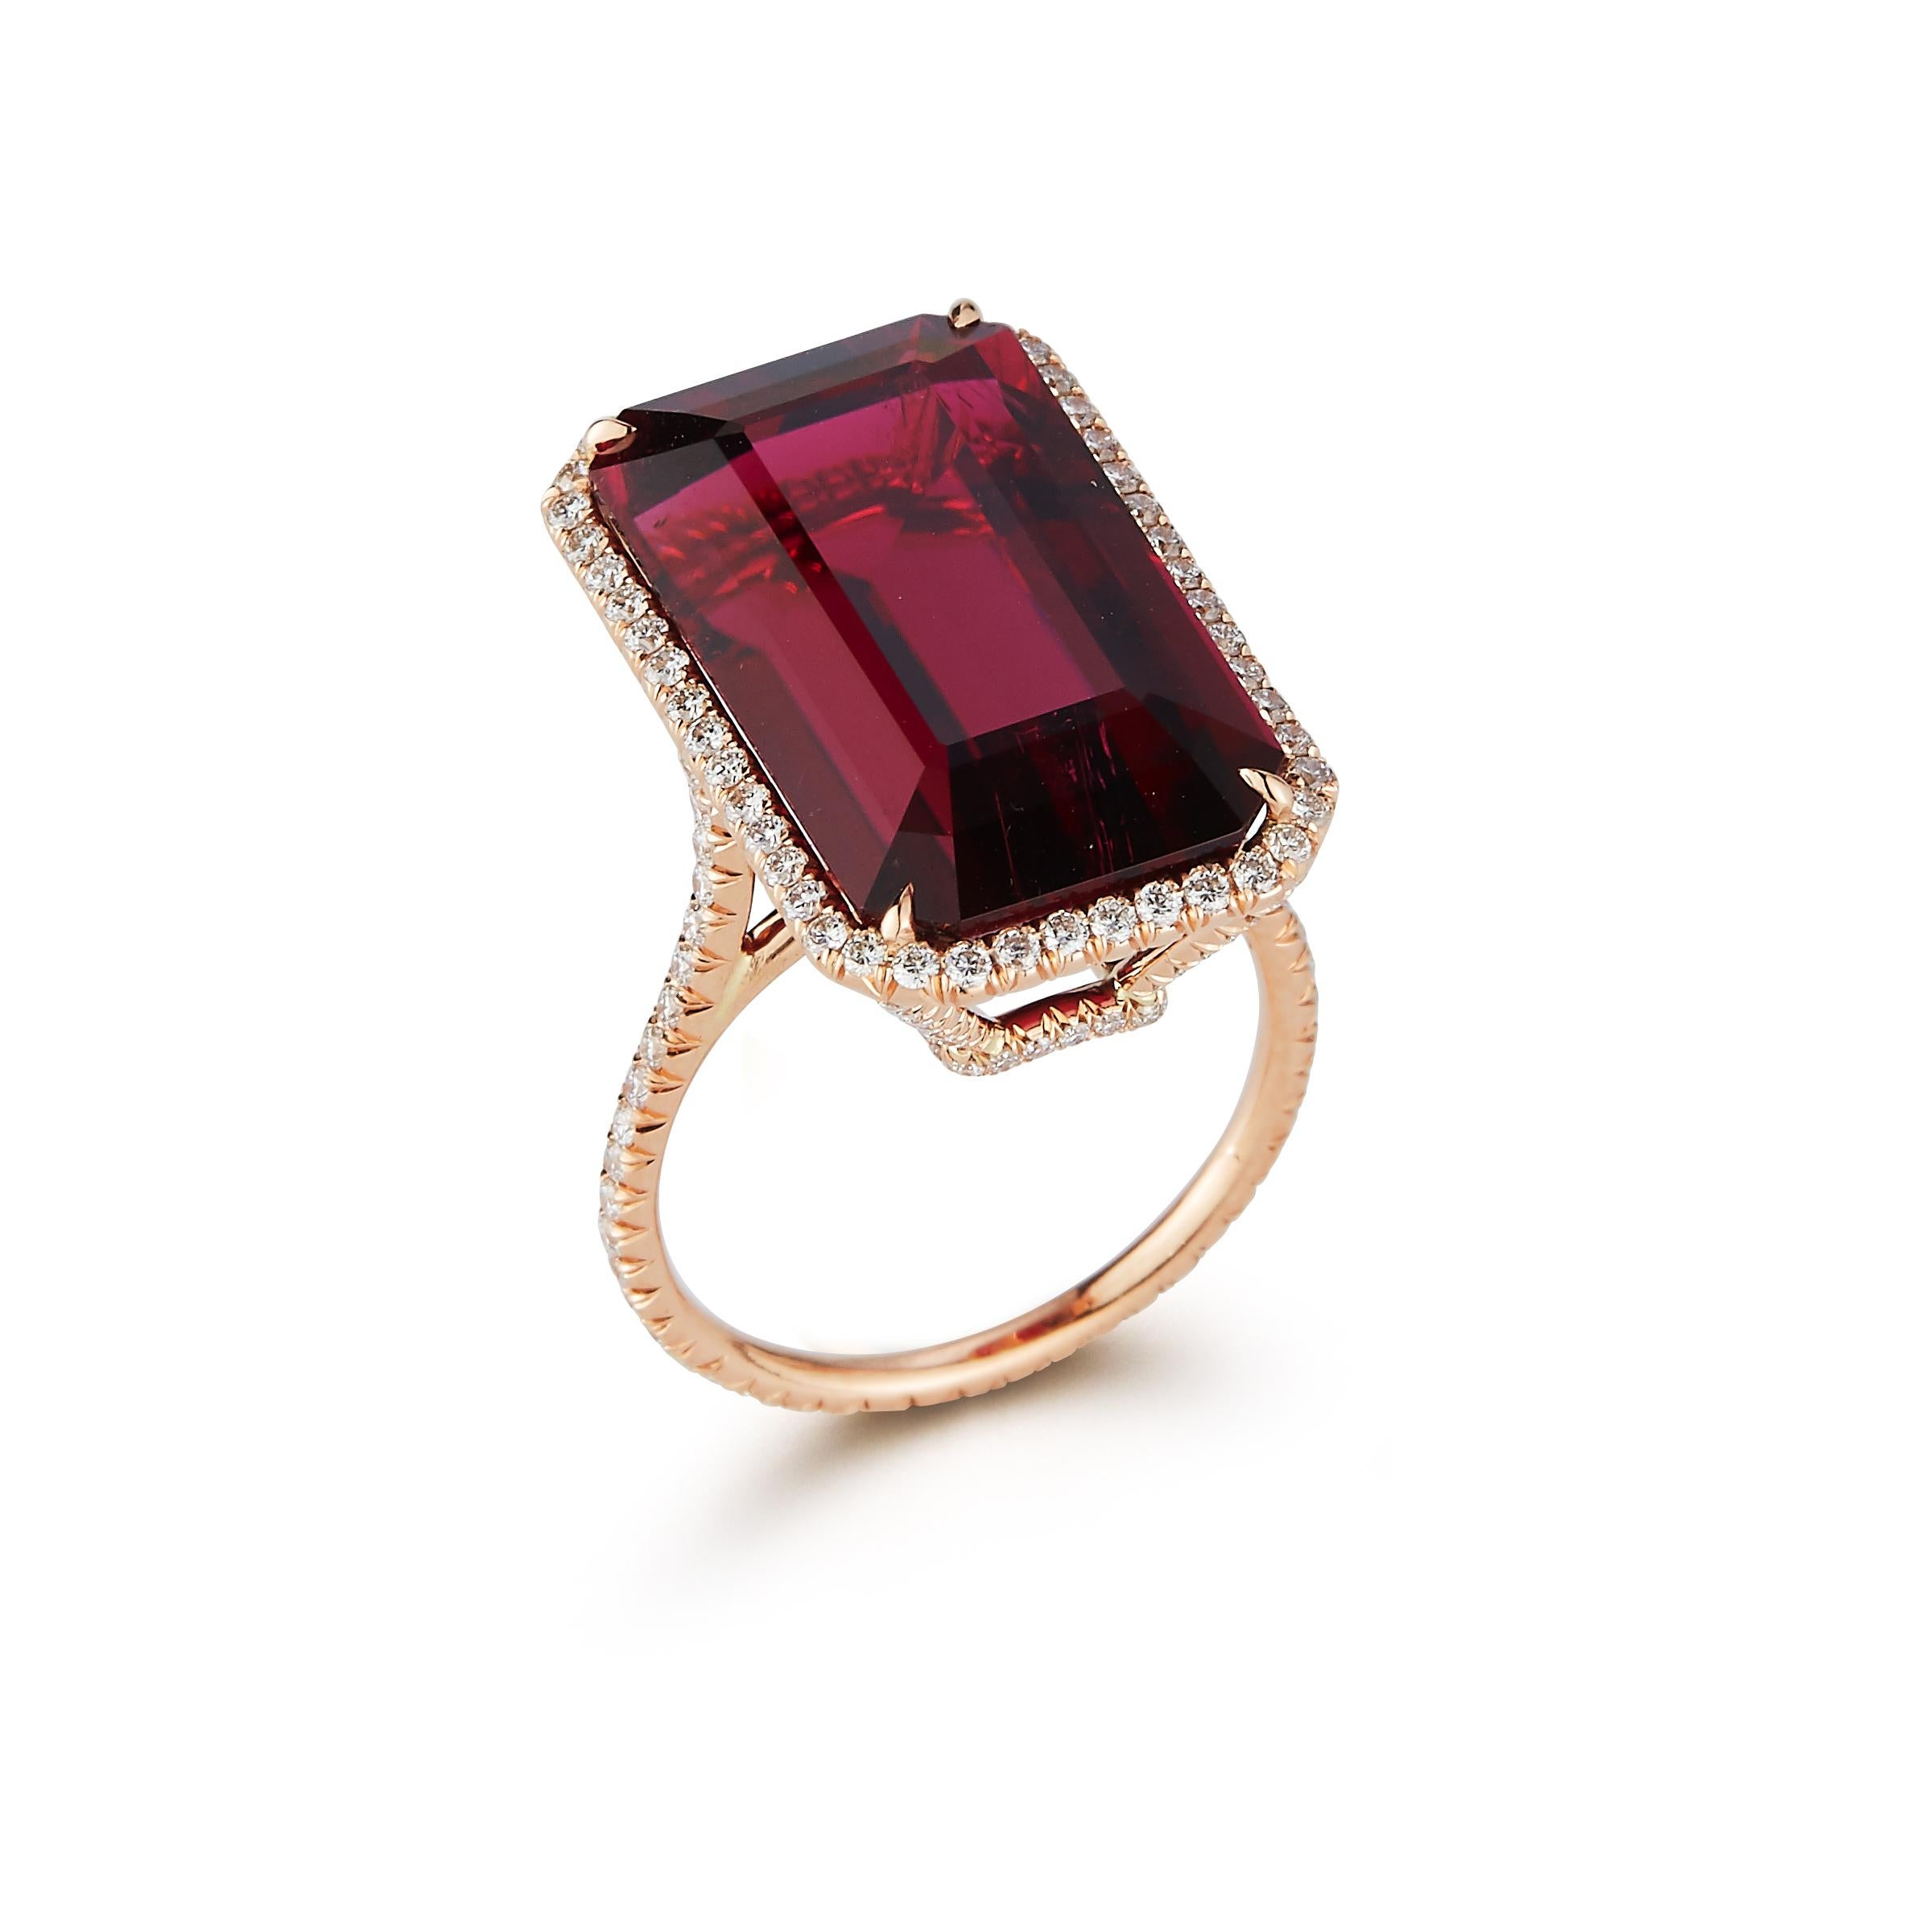 Rubellite Tourmaline and Diamond Cocktail Ring 

1 rubellite approximately 20.00 cts set in a pave diamond 18k rose gold solitaire setting

Diamond Weight:  approximately 1.84 cts 

Ring Size: 5.5

Re sizable free of  charge



